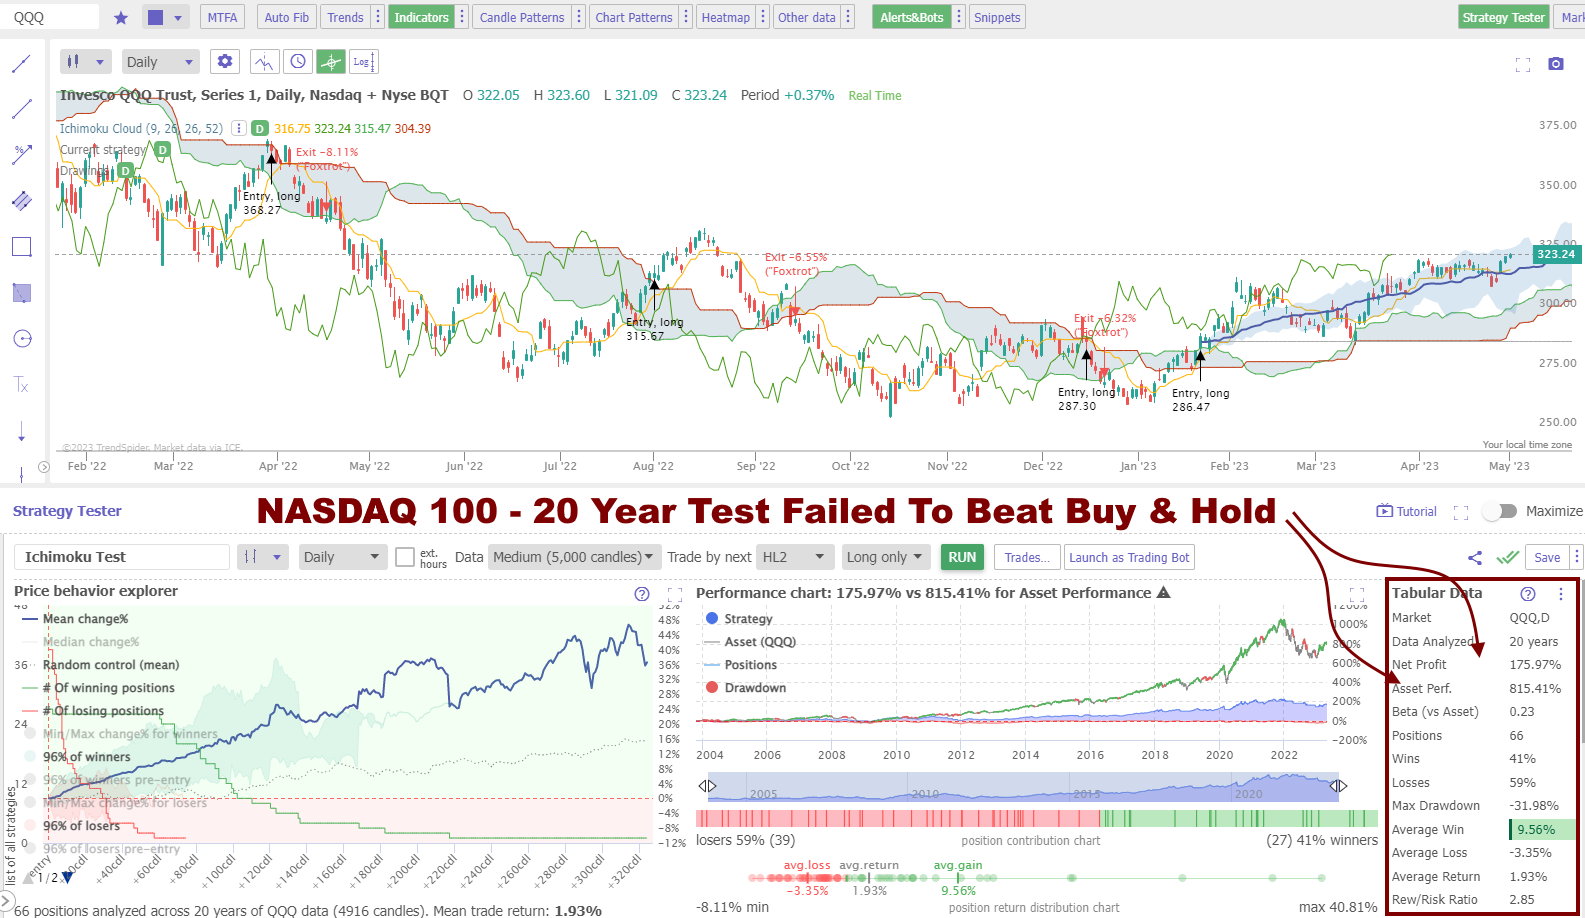 Test Results from the Ichimoku Cloud Indicator vs. the NASDAQ 100.